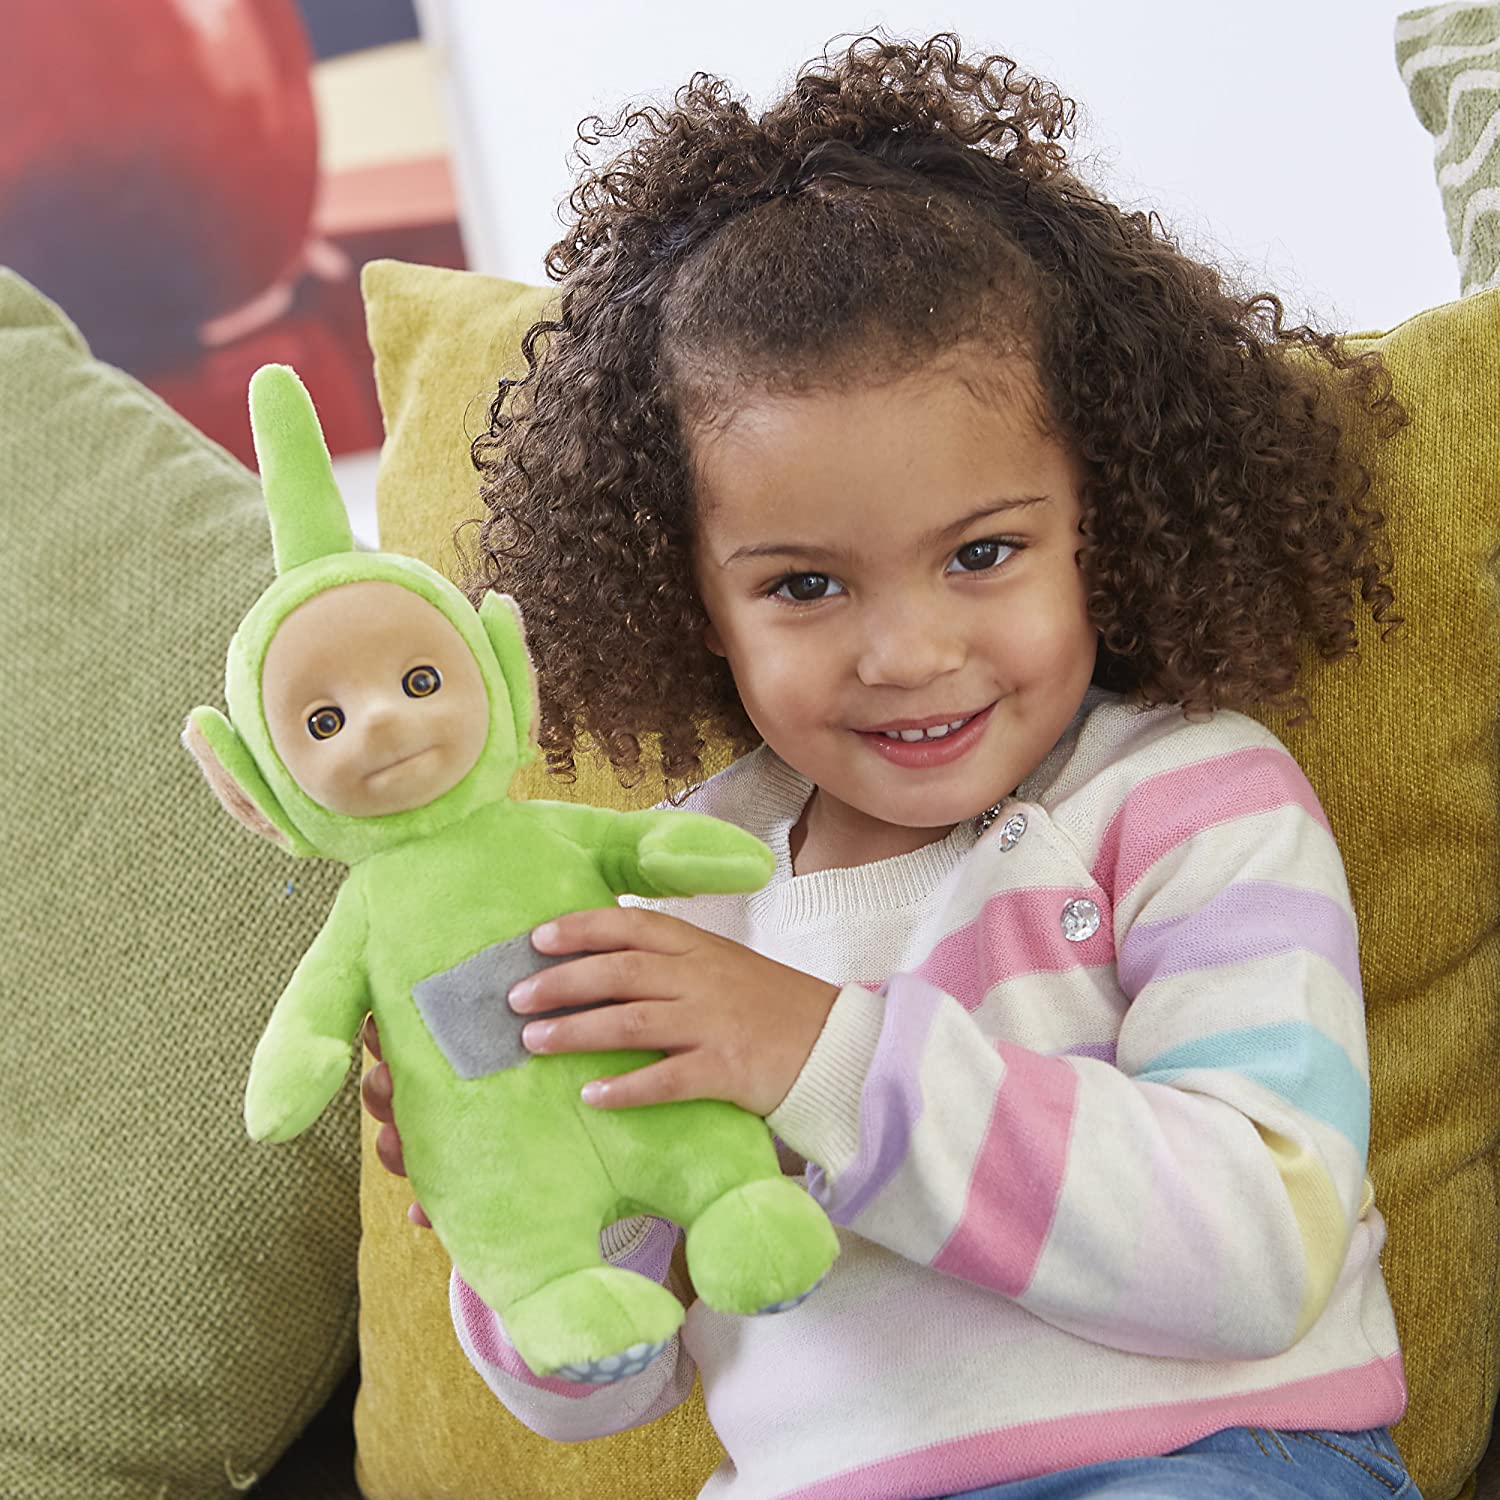 Dipsy Teletubbies Talking Plush Toy With Girl.